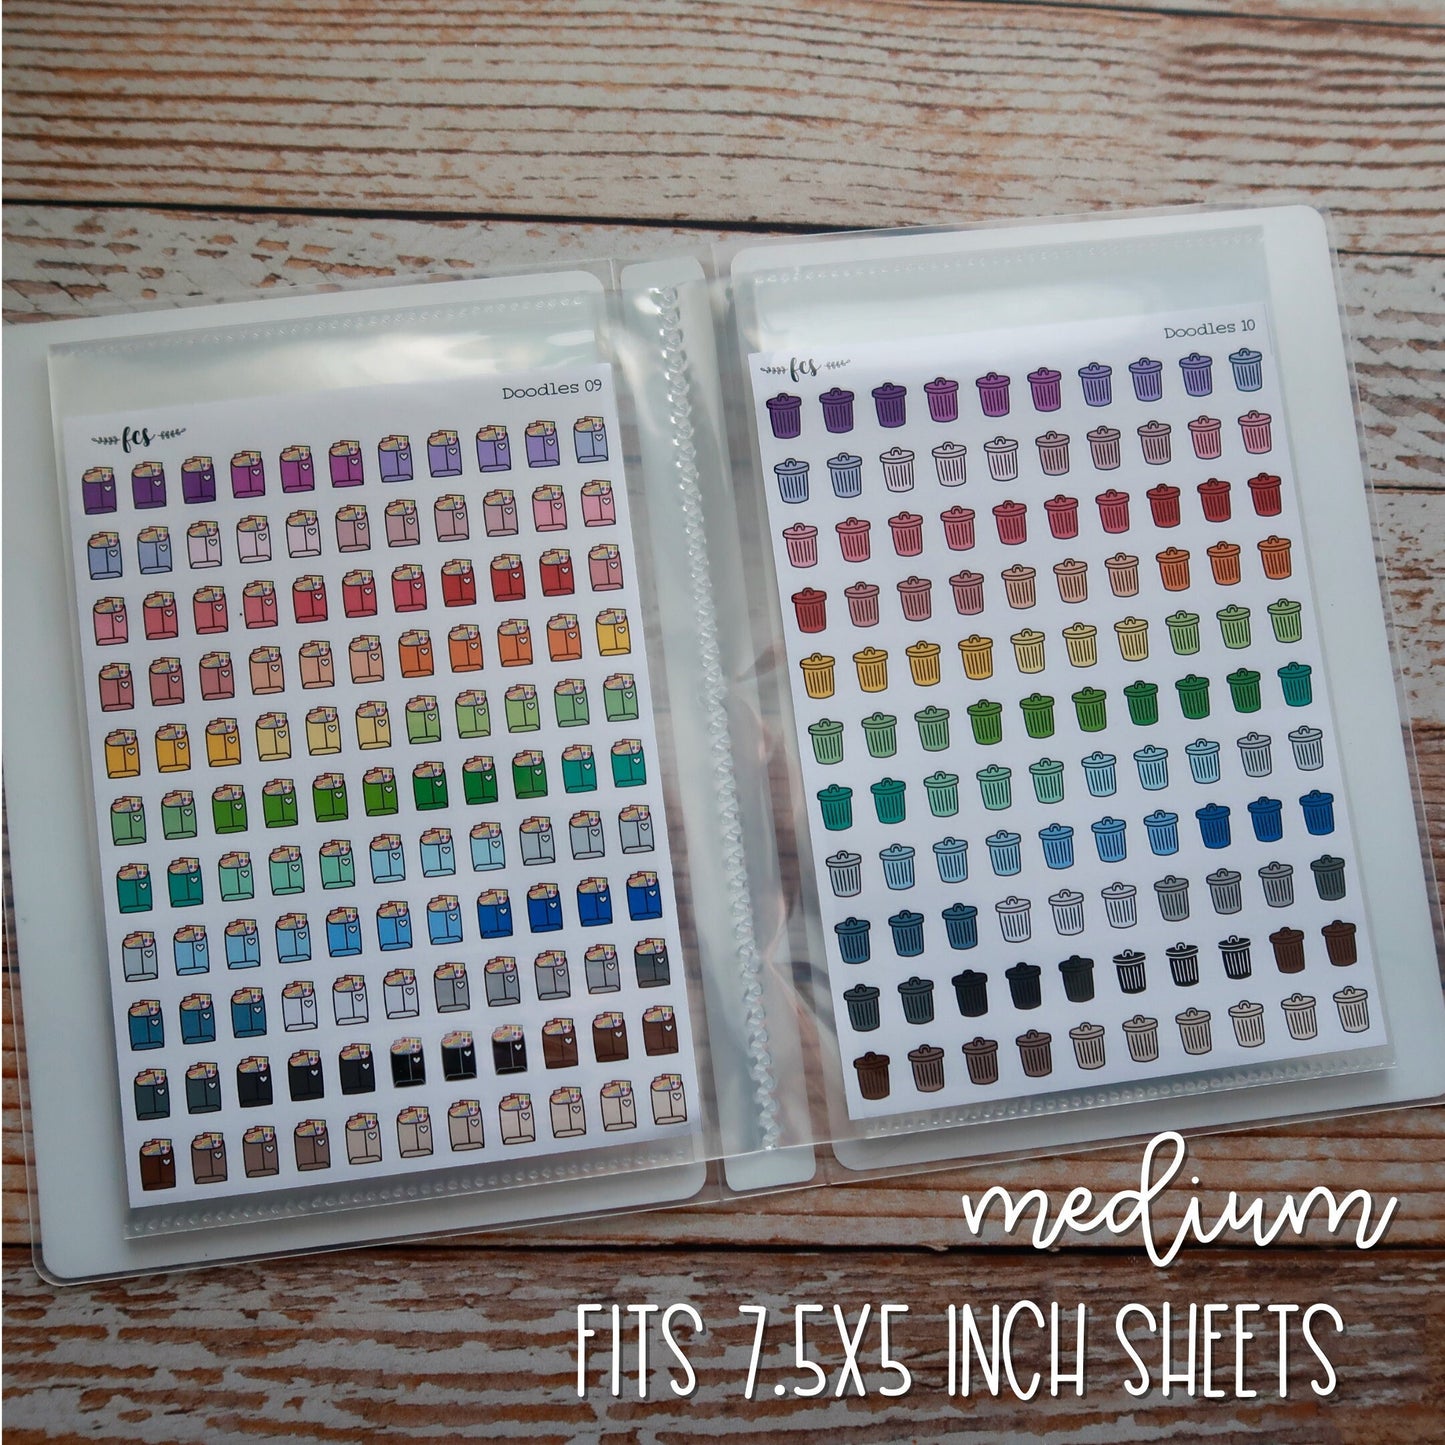 SB-LL || Lush Leaves sticker book in three sizes: 4.75x3.75 sheets, 7x5 sheets, and 8.5x5.5 sheets